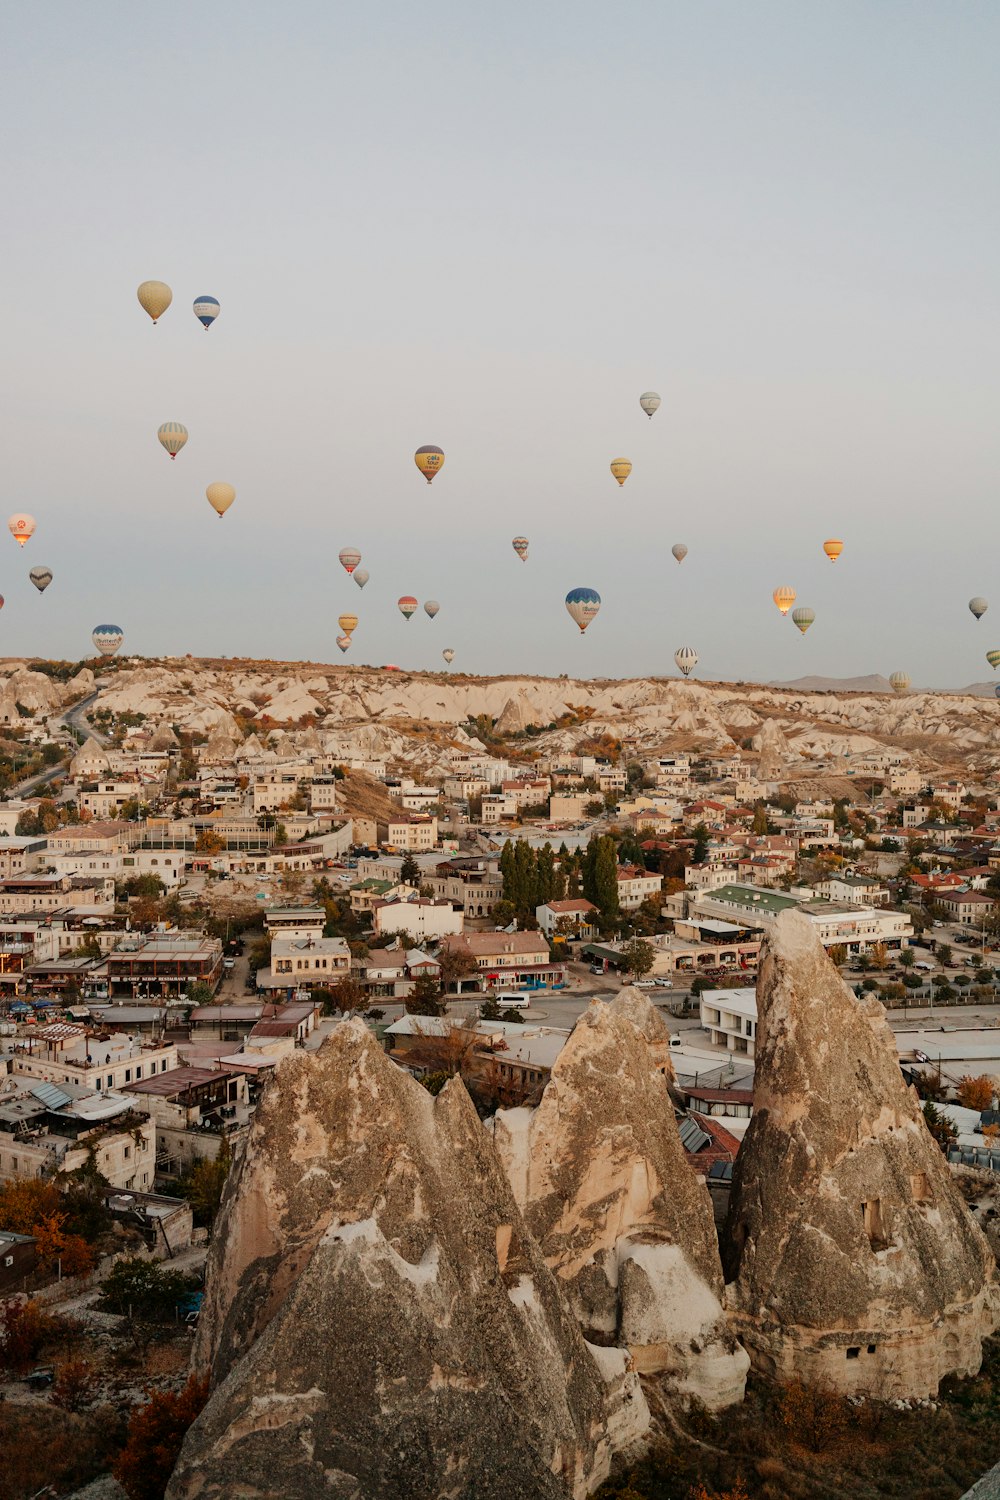 a group of hot air balloons over a city